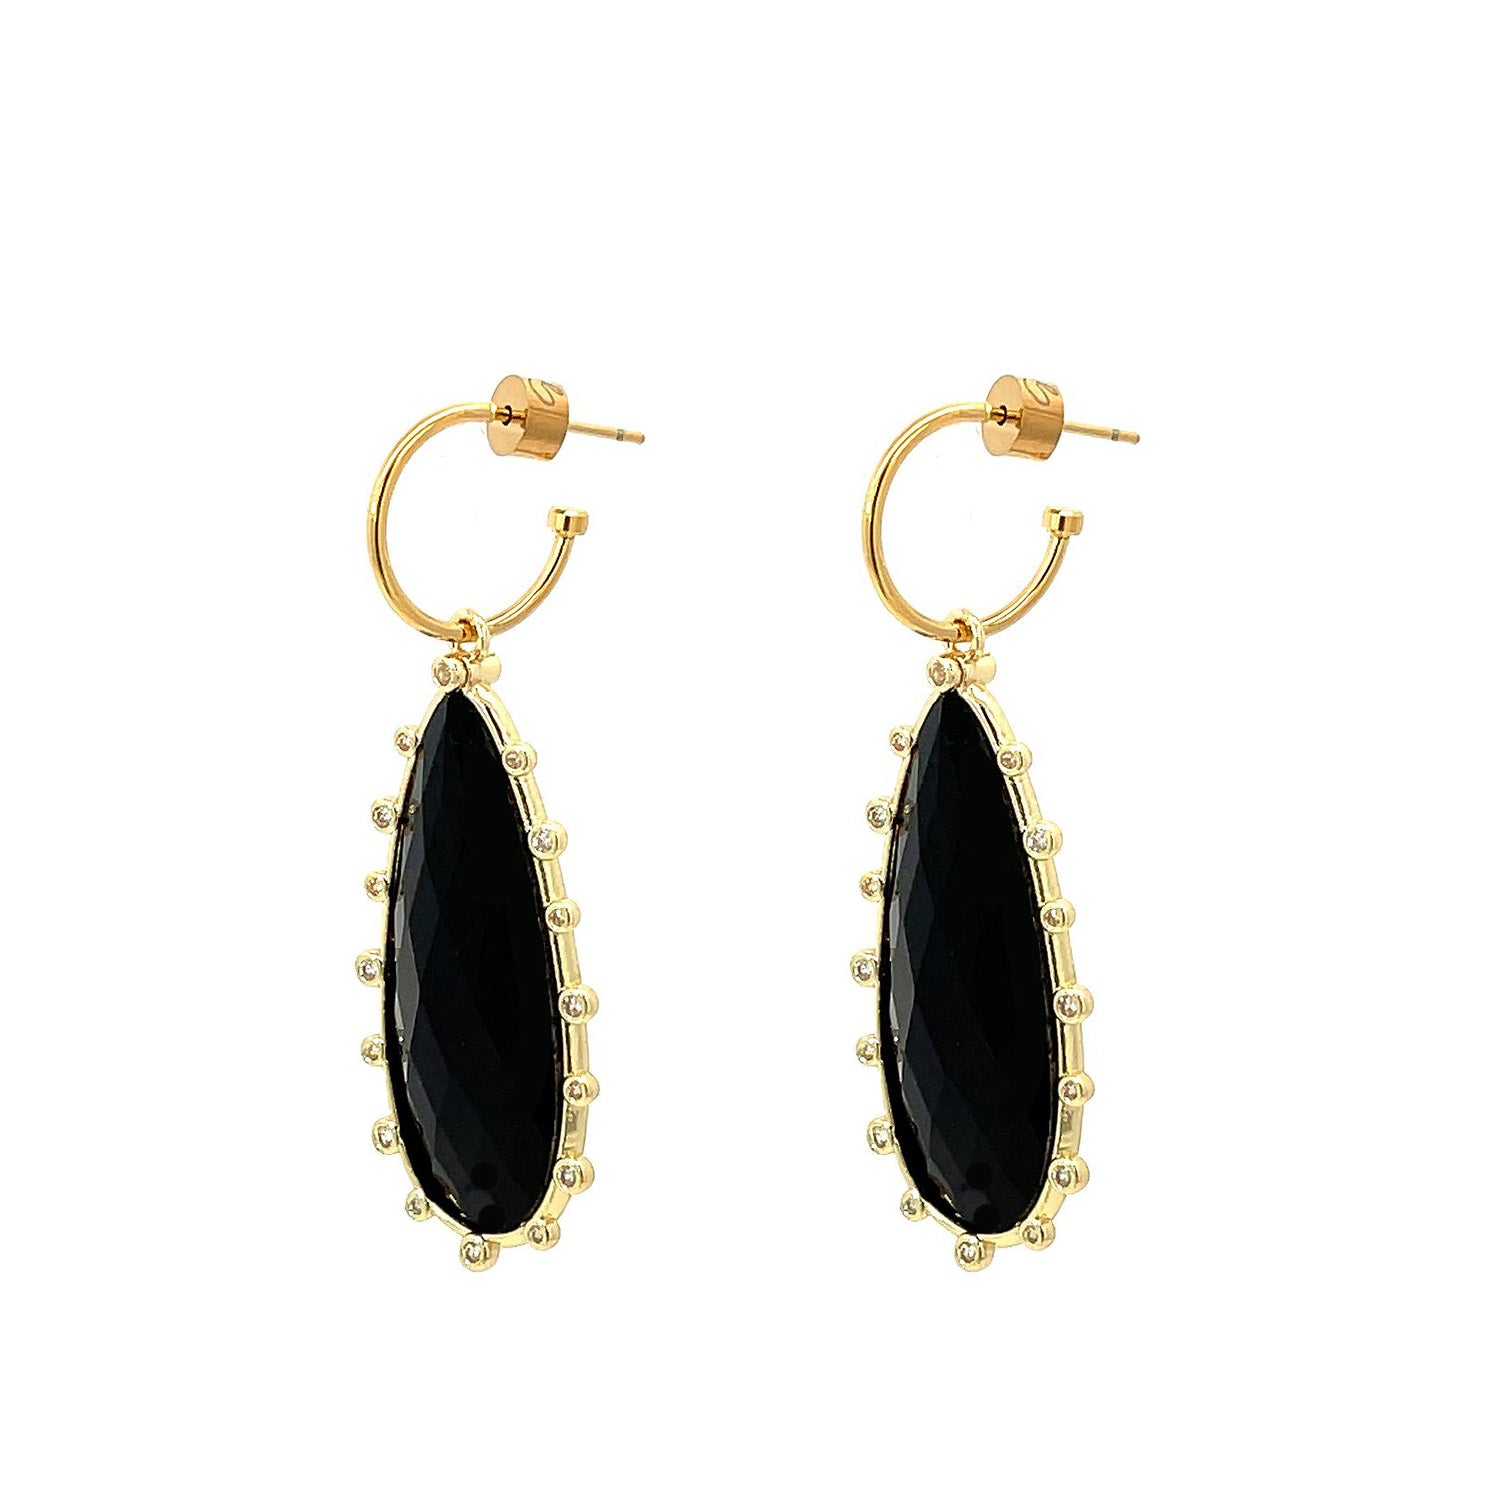 Discover Spiked Beauty in Black Onyx Earrings